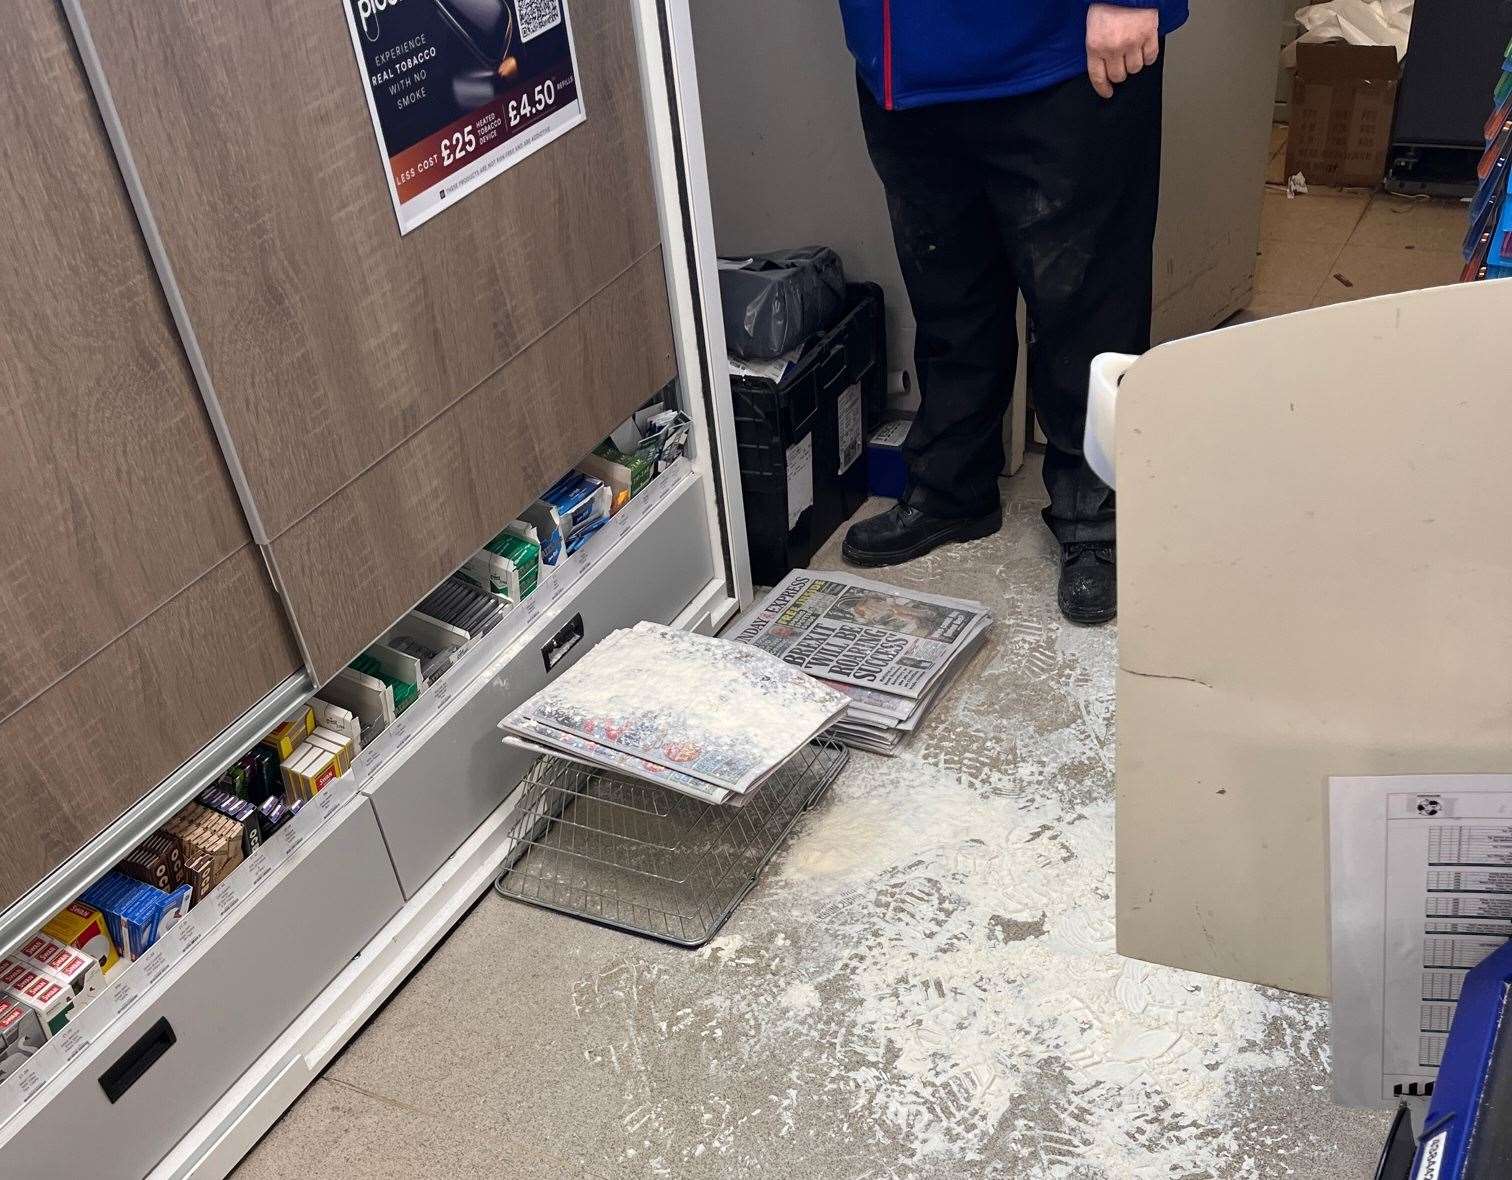 The Tesco Express in Commercial Rd, Paddock Wood, was trashed by youths.